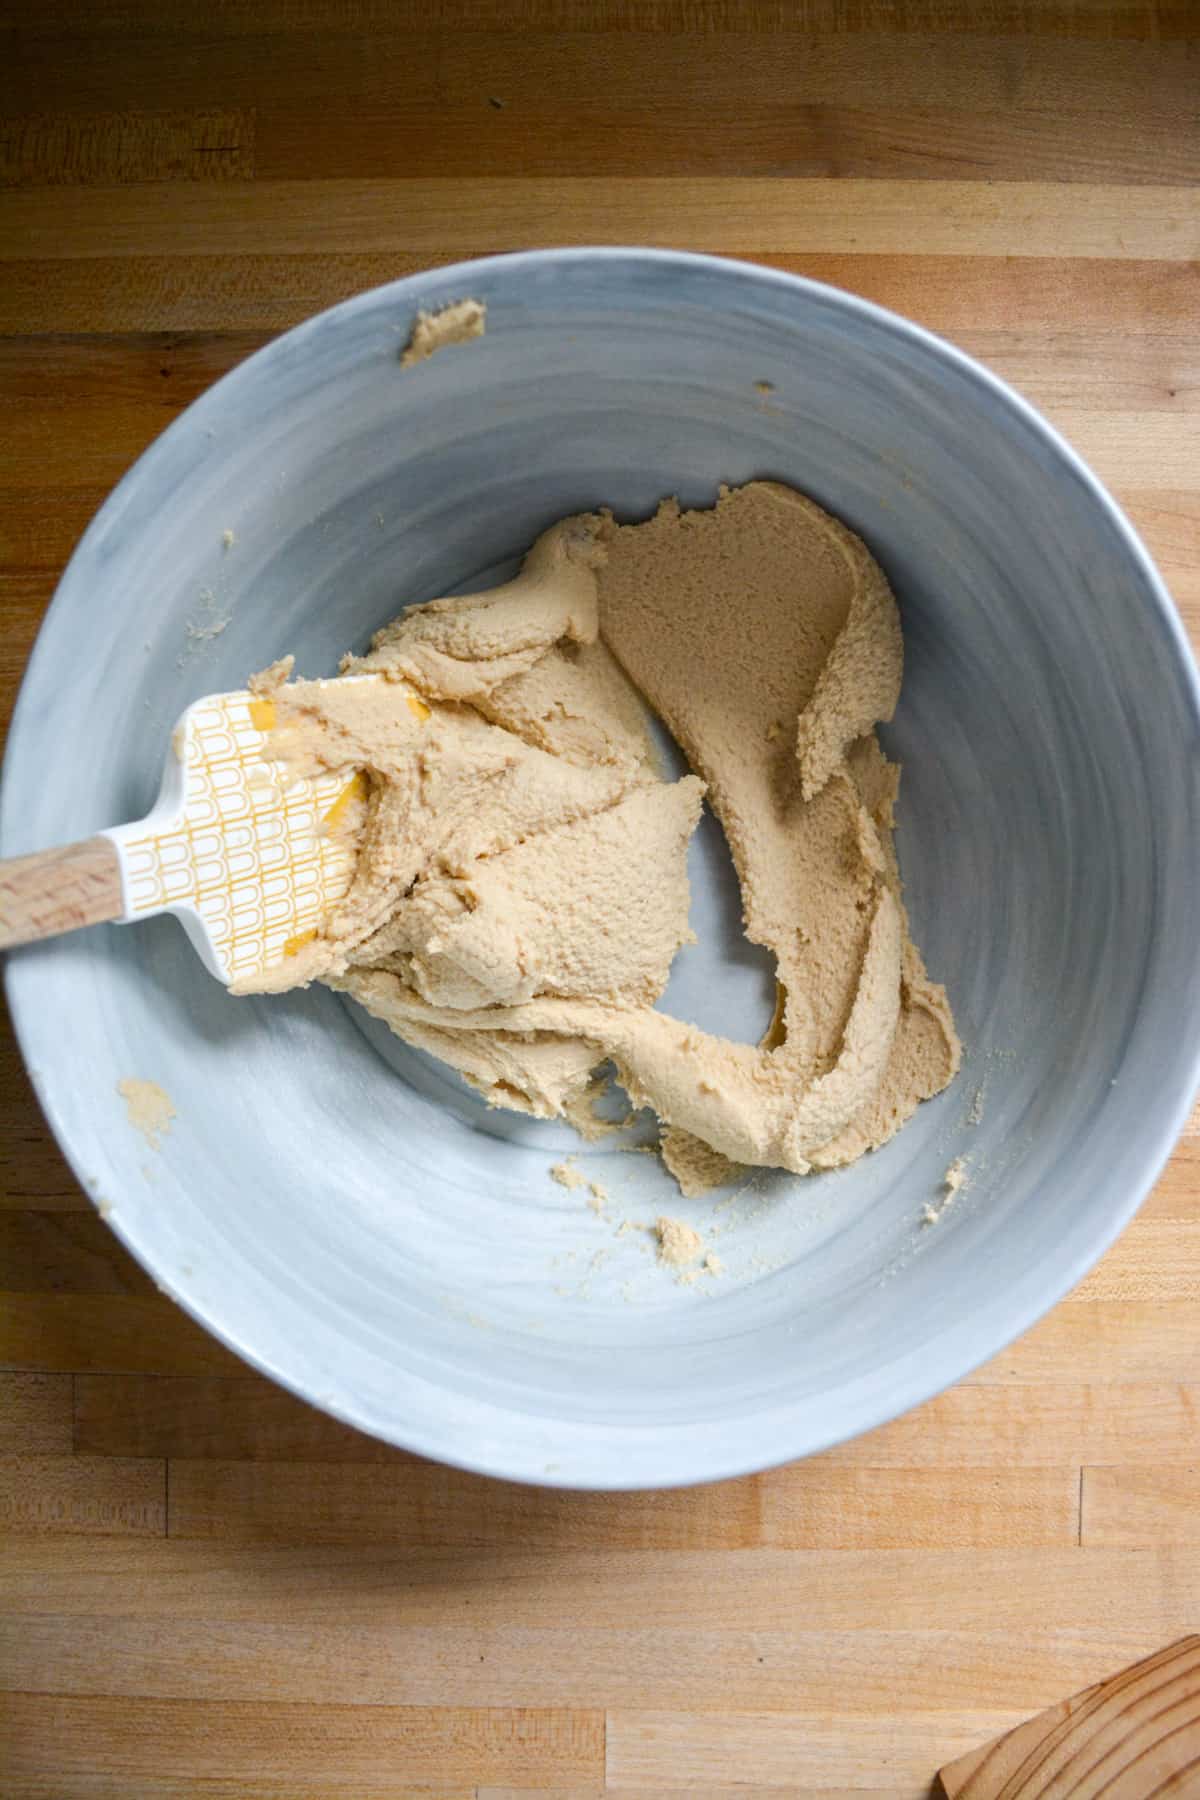 Vegan butter and brown sugar creamed together in a mixing bowl with a rubber spatula in the bowl.